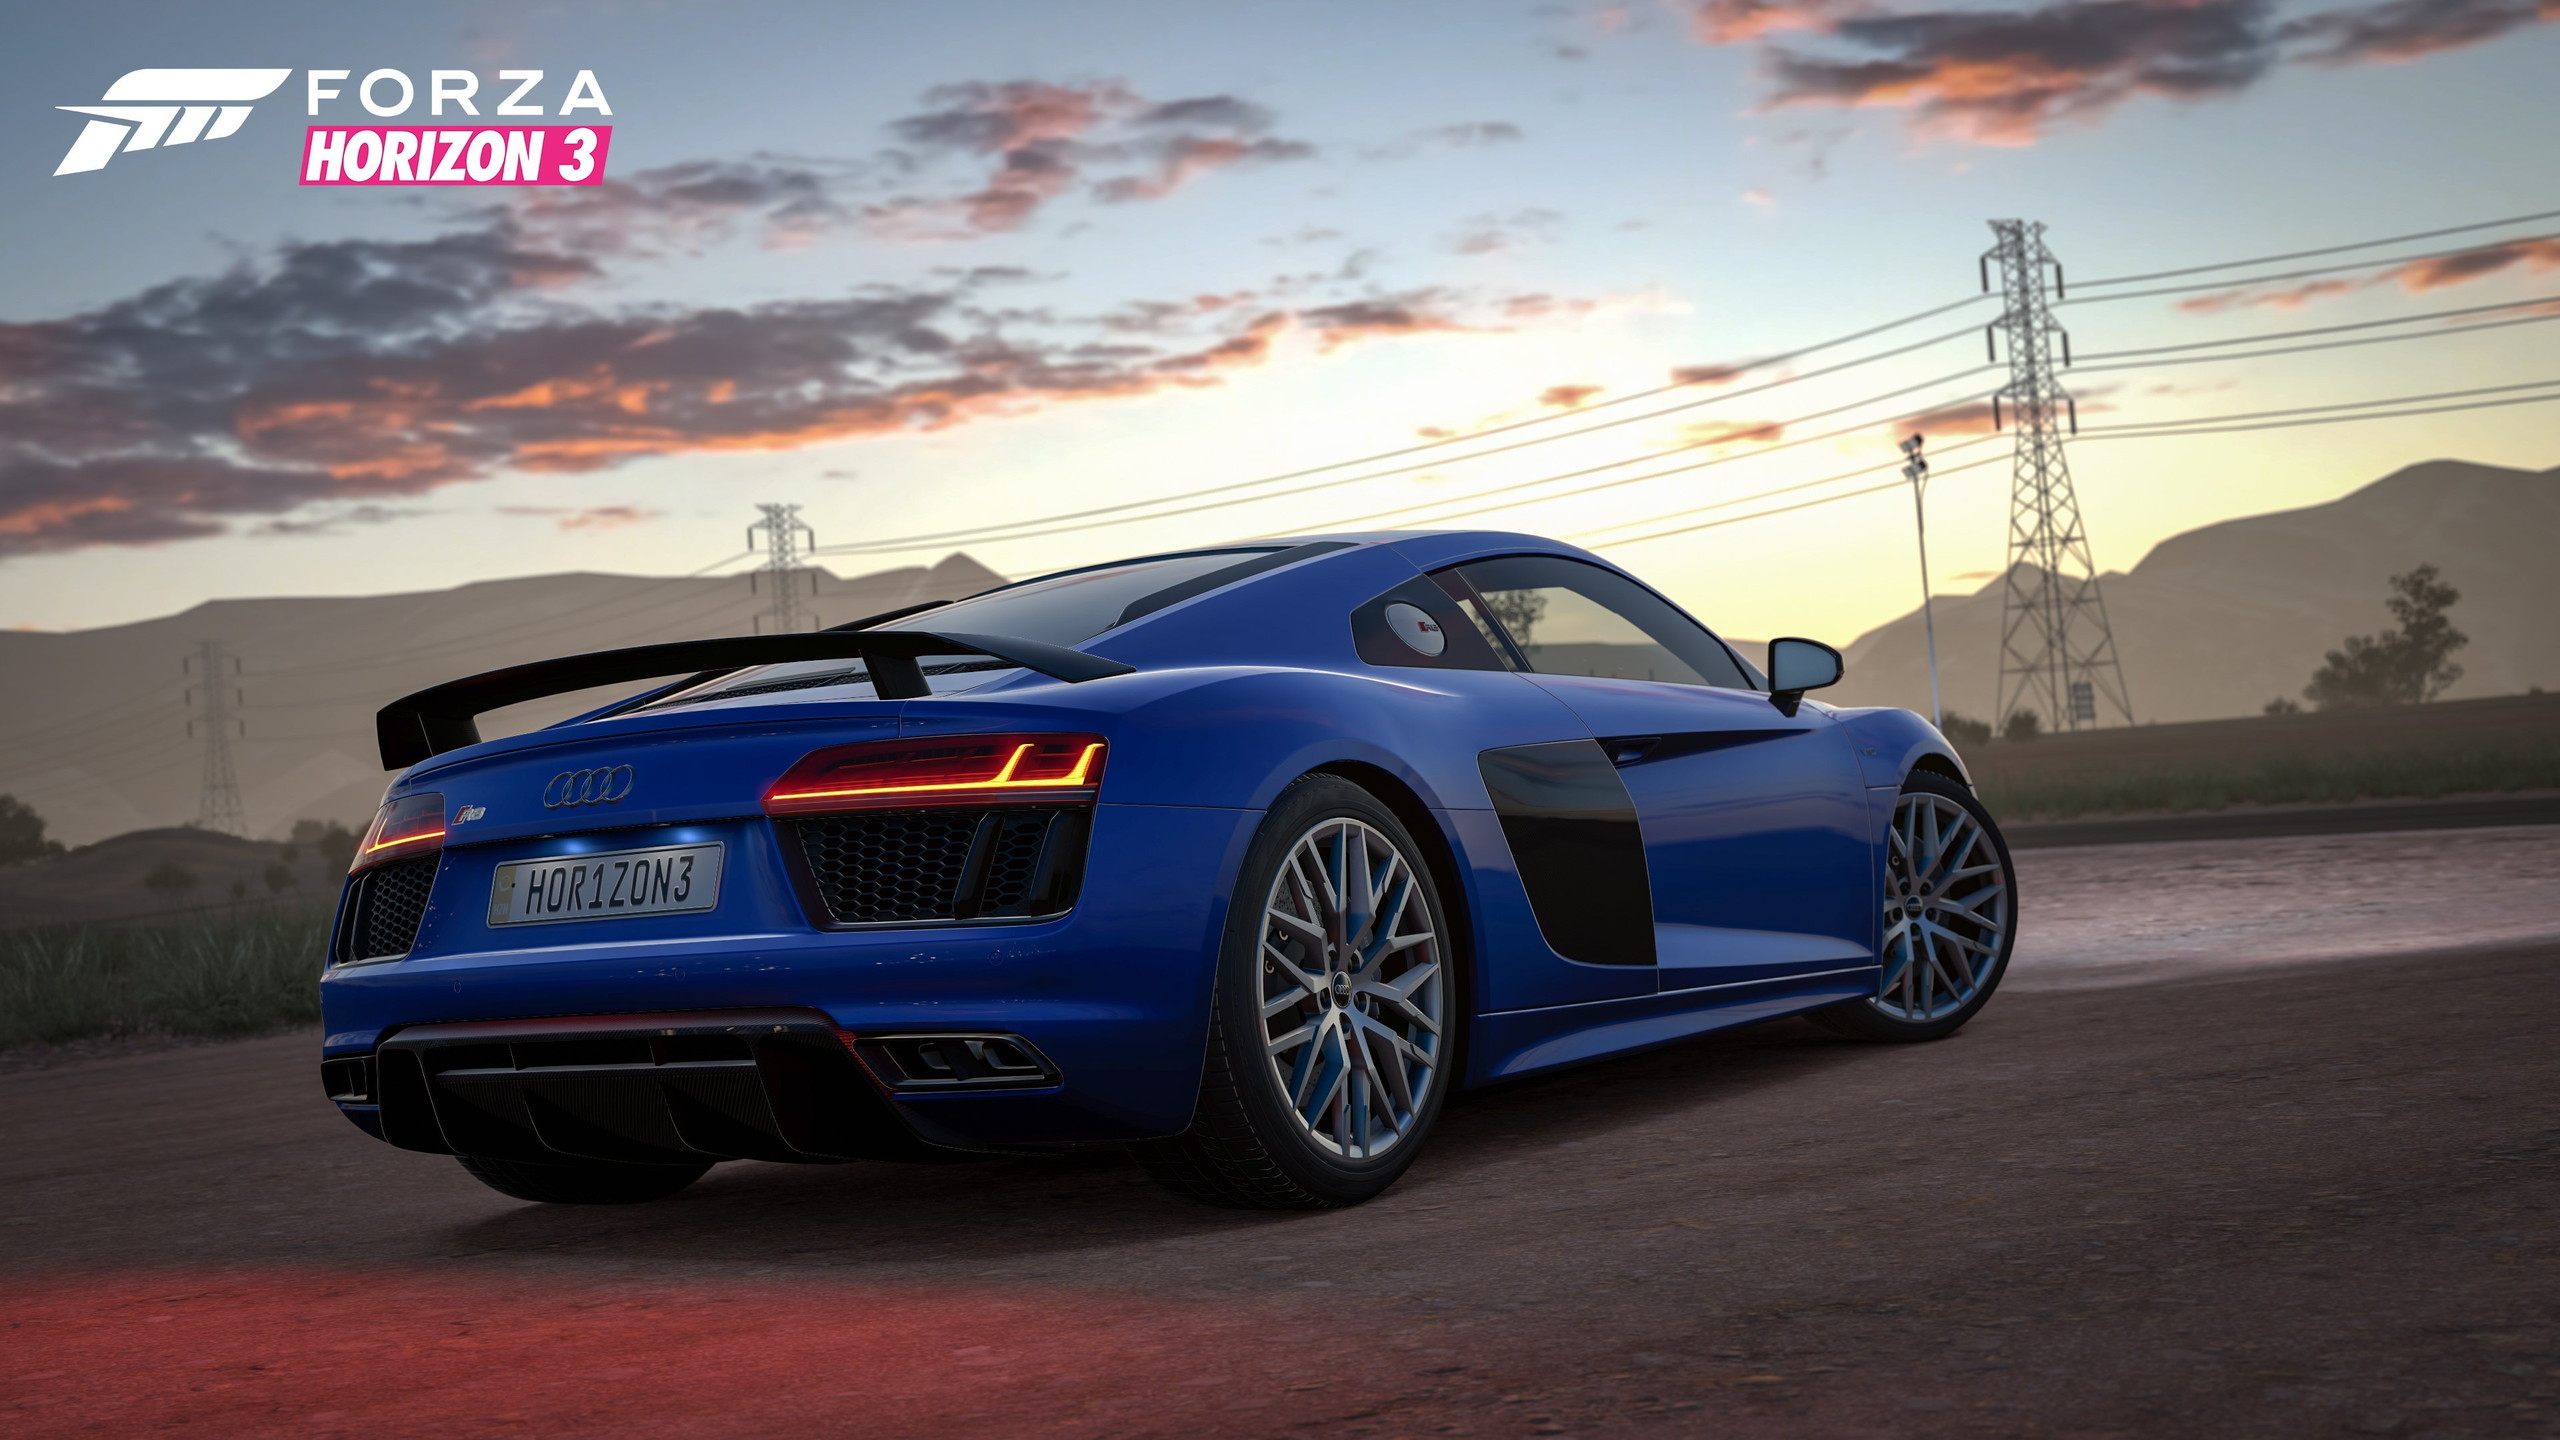 Audi R8 V10 Plus is available as a bonus with Forza Horizon 3 pre 